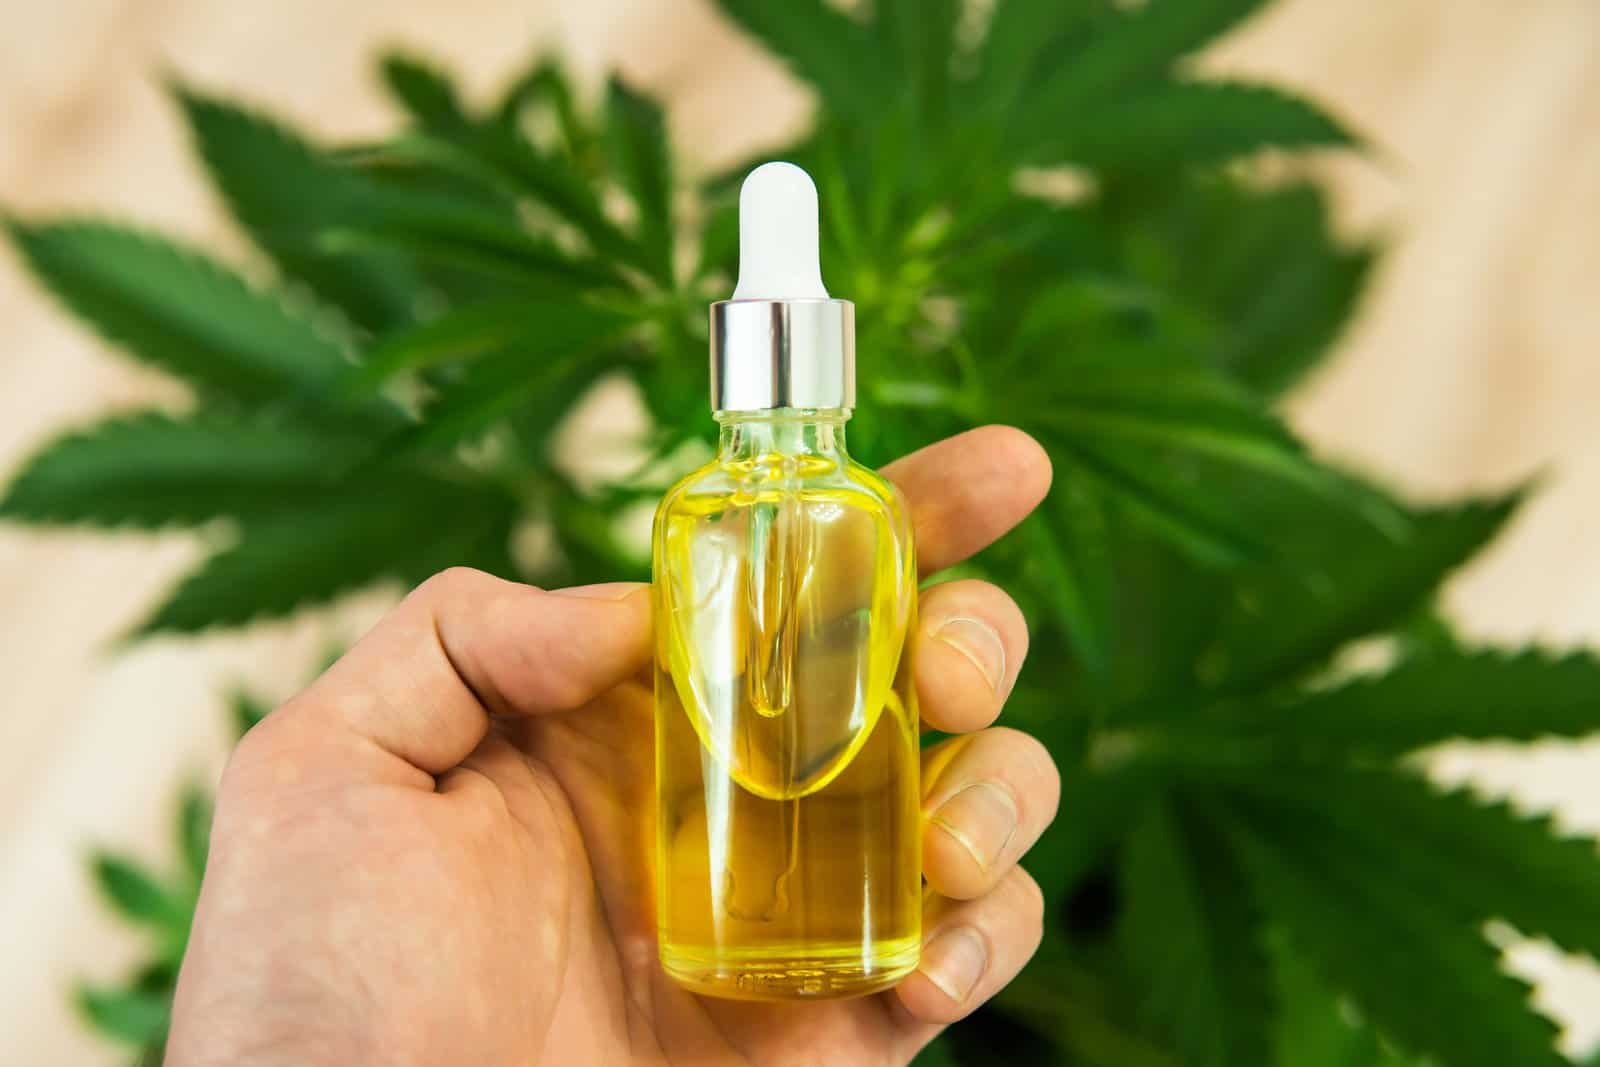 Learn How to Make Your Own CBD Oil